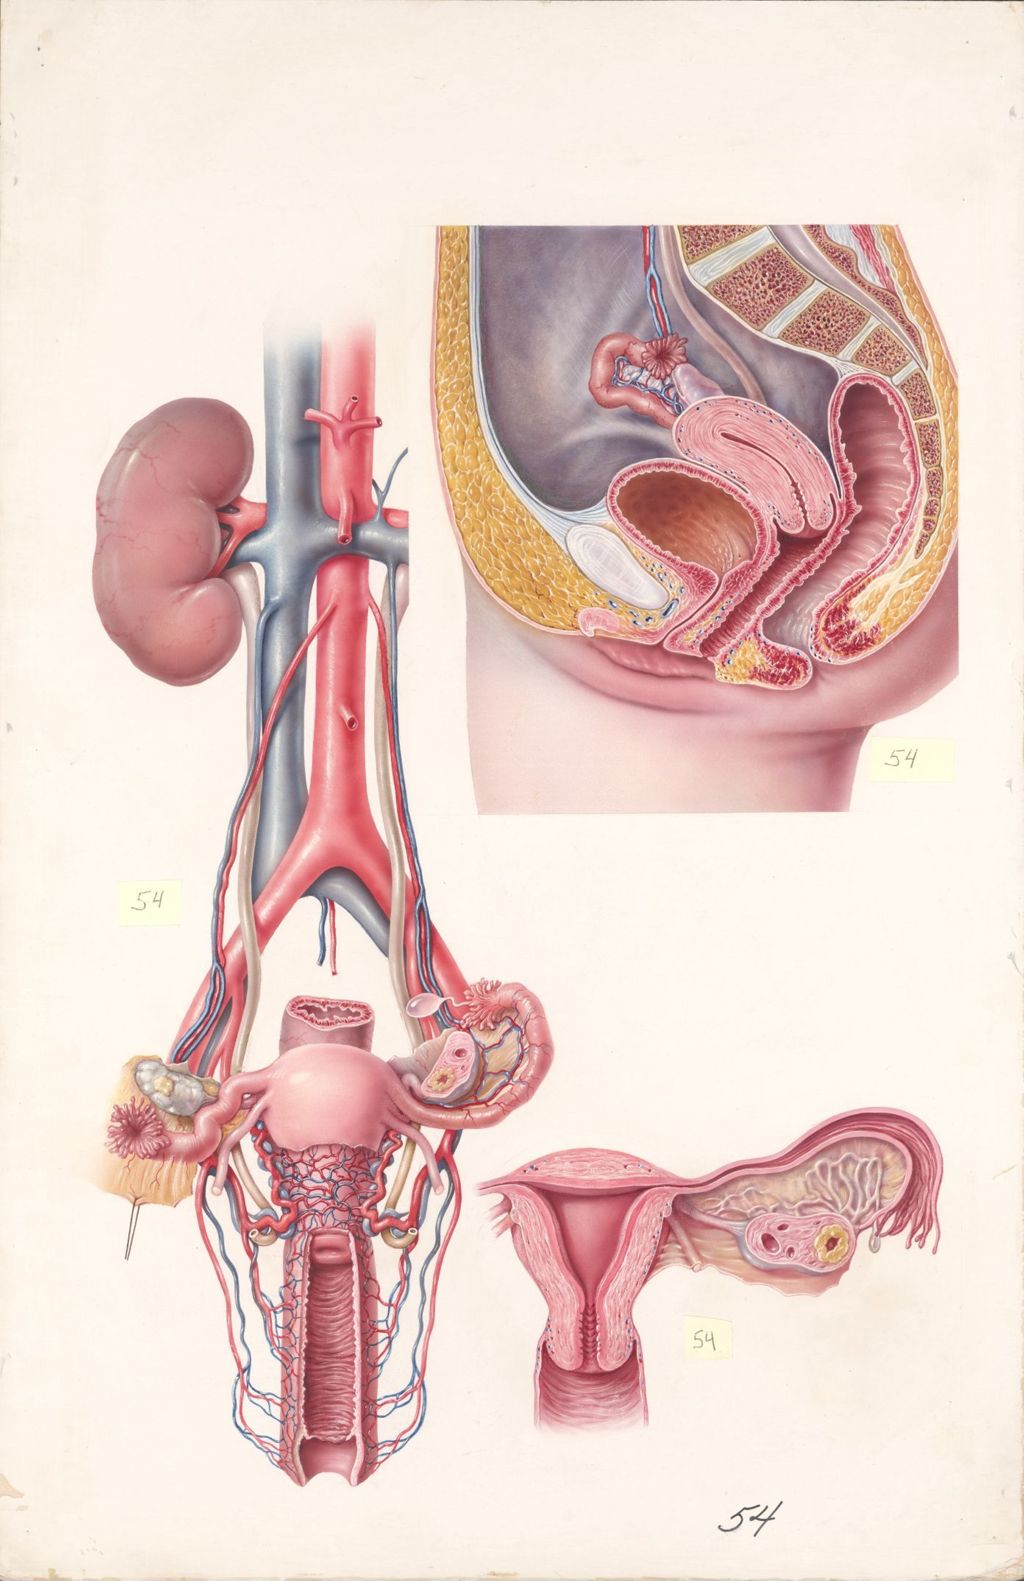 Miniature of Medical Profiles, Diuril and Hydrodiuril, Normal Female Reproductive Organs